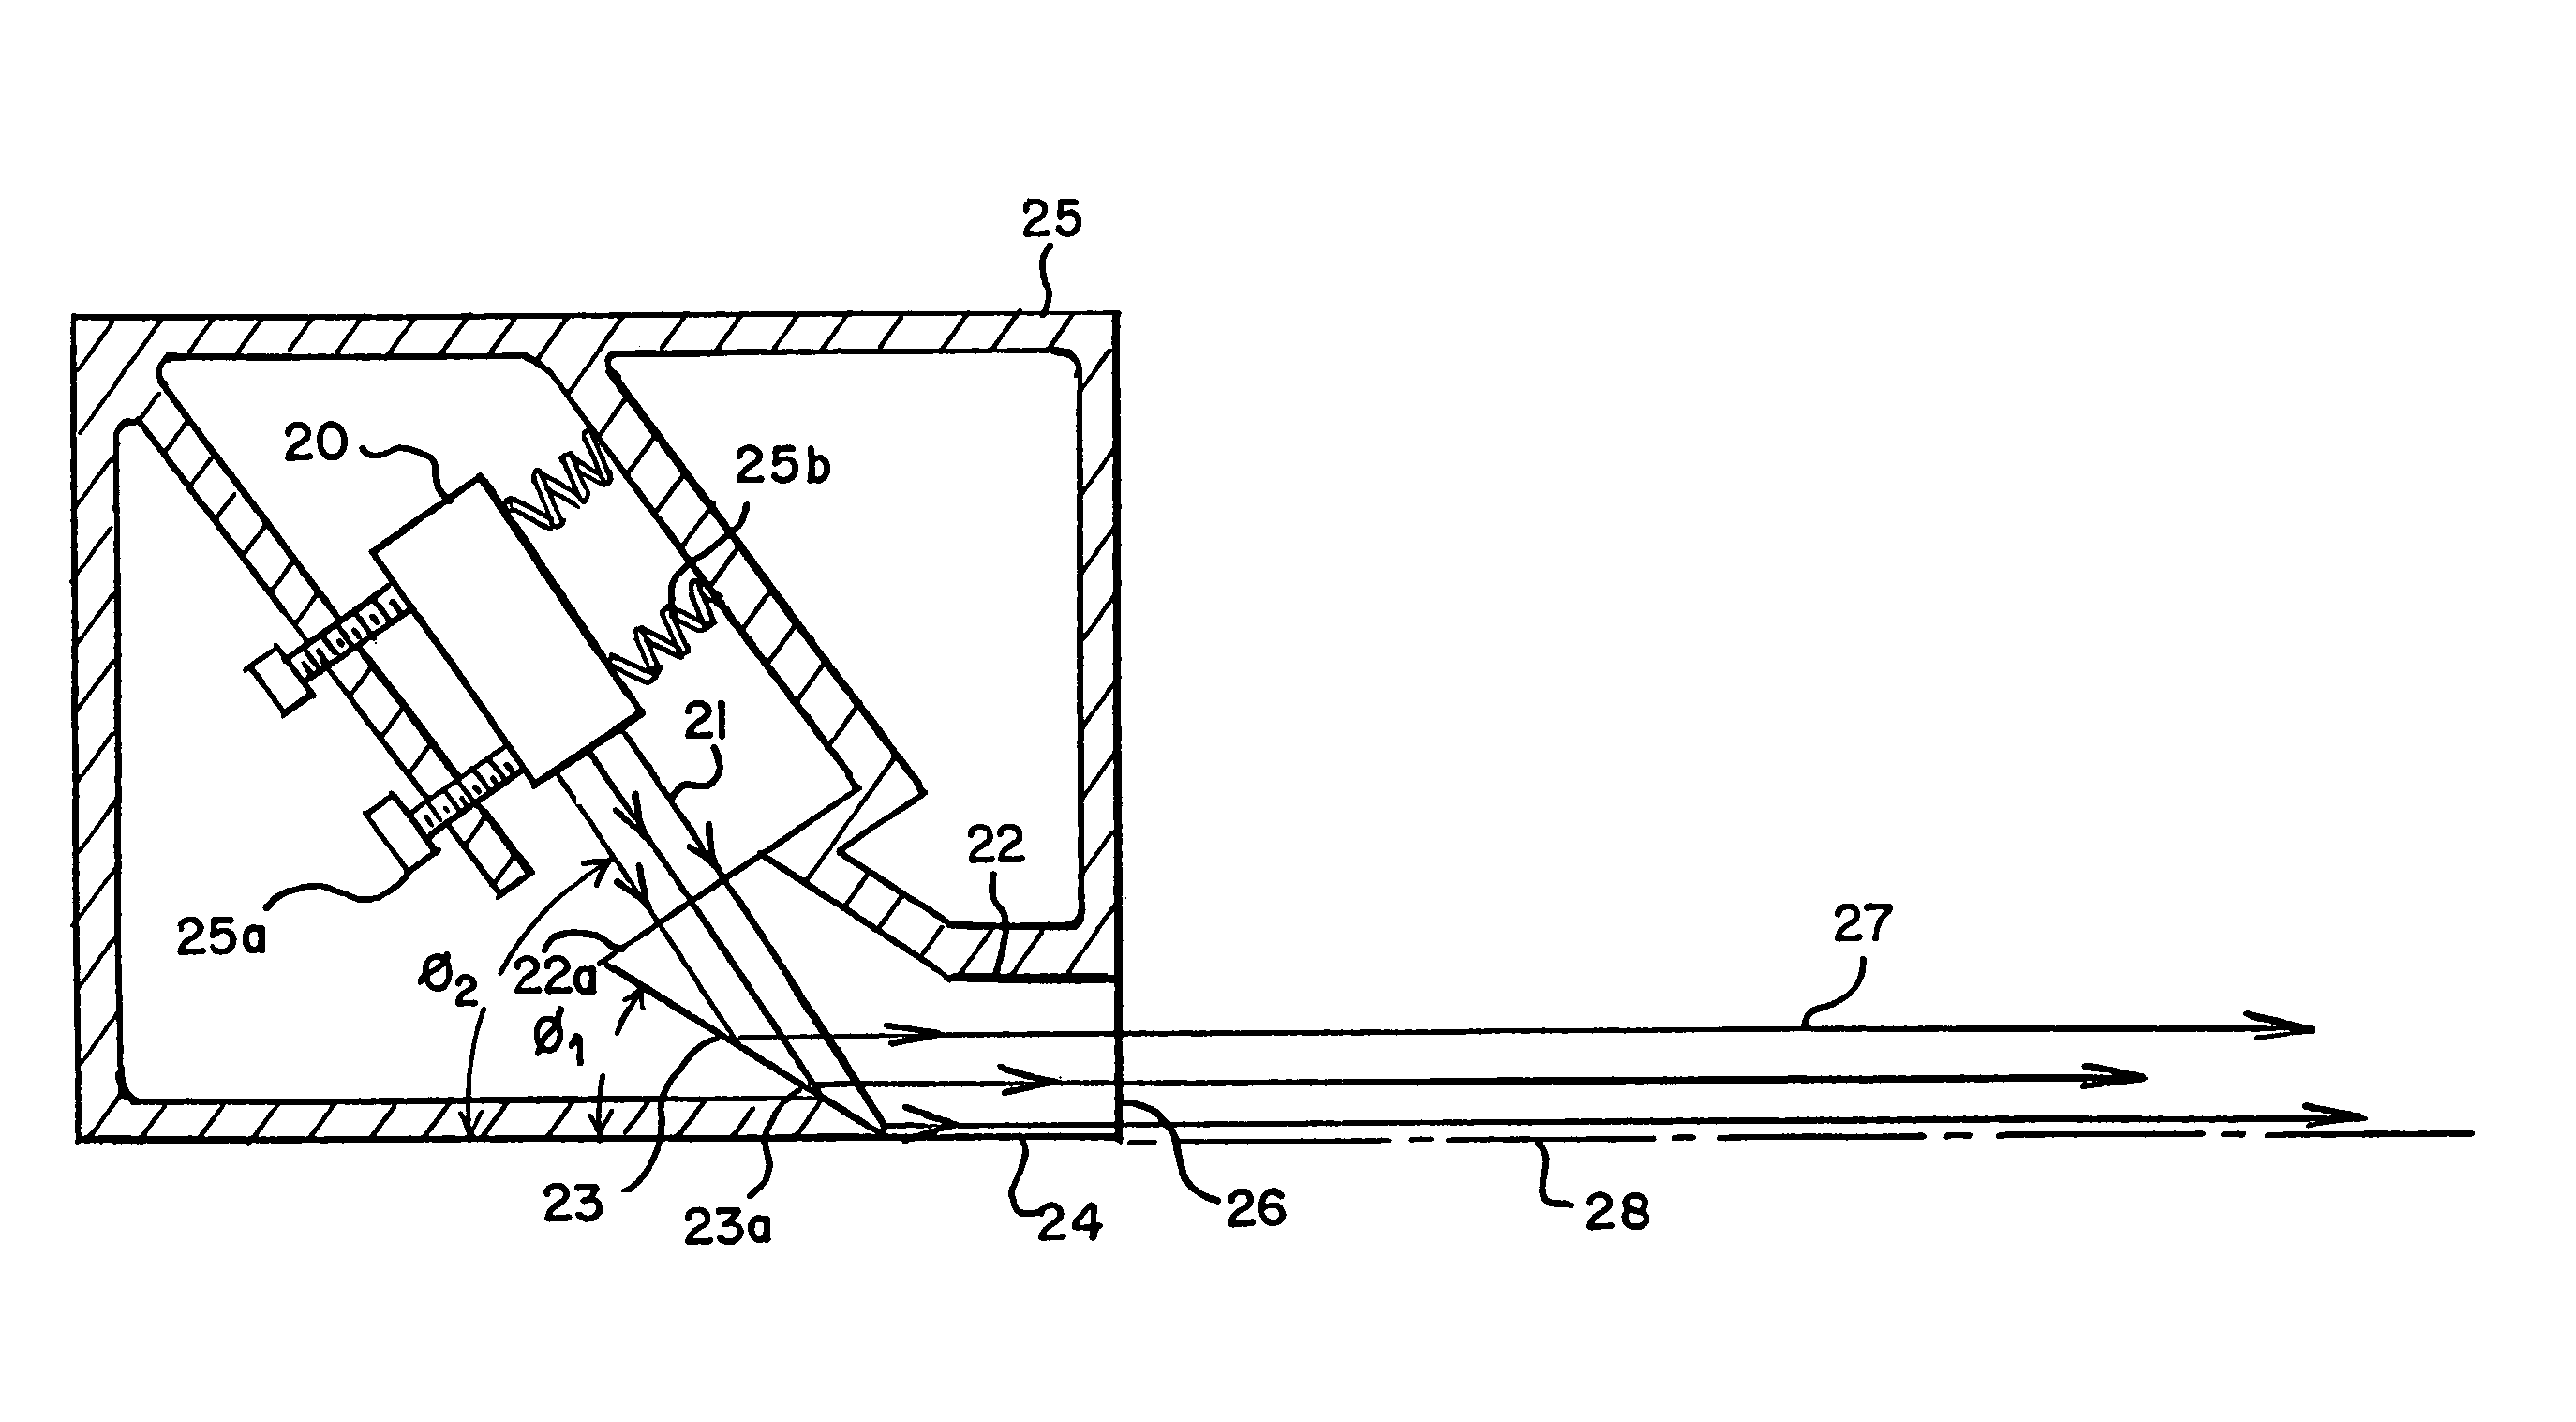 Laser line projected on an edge of a surface